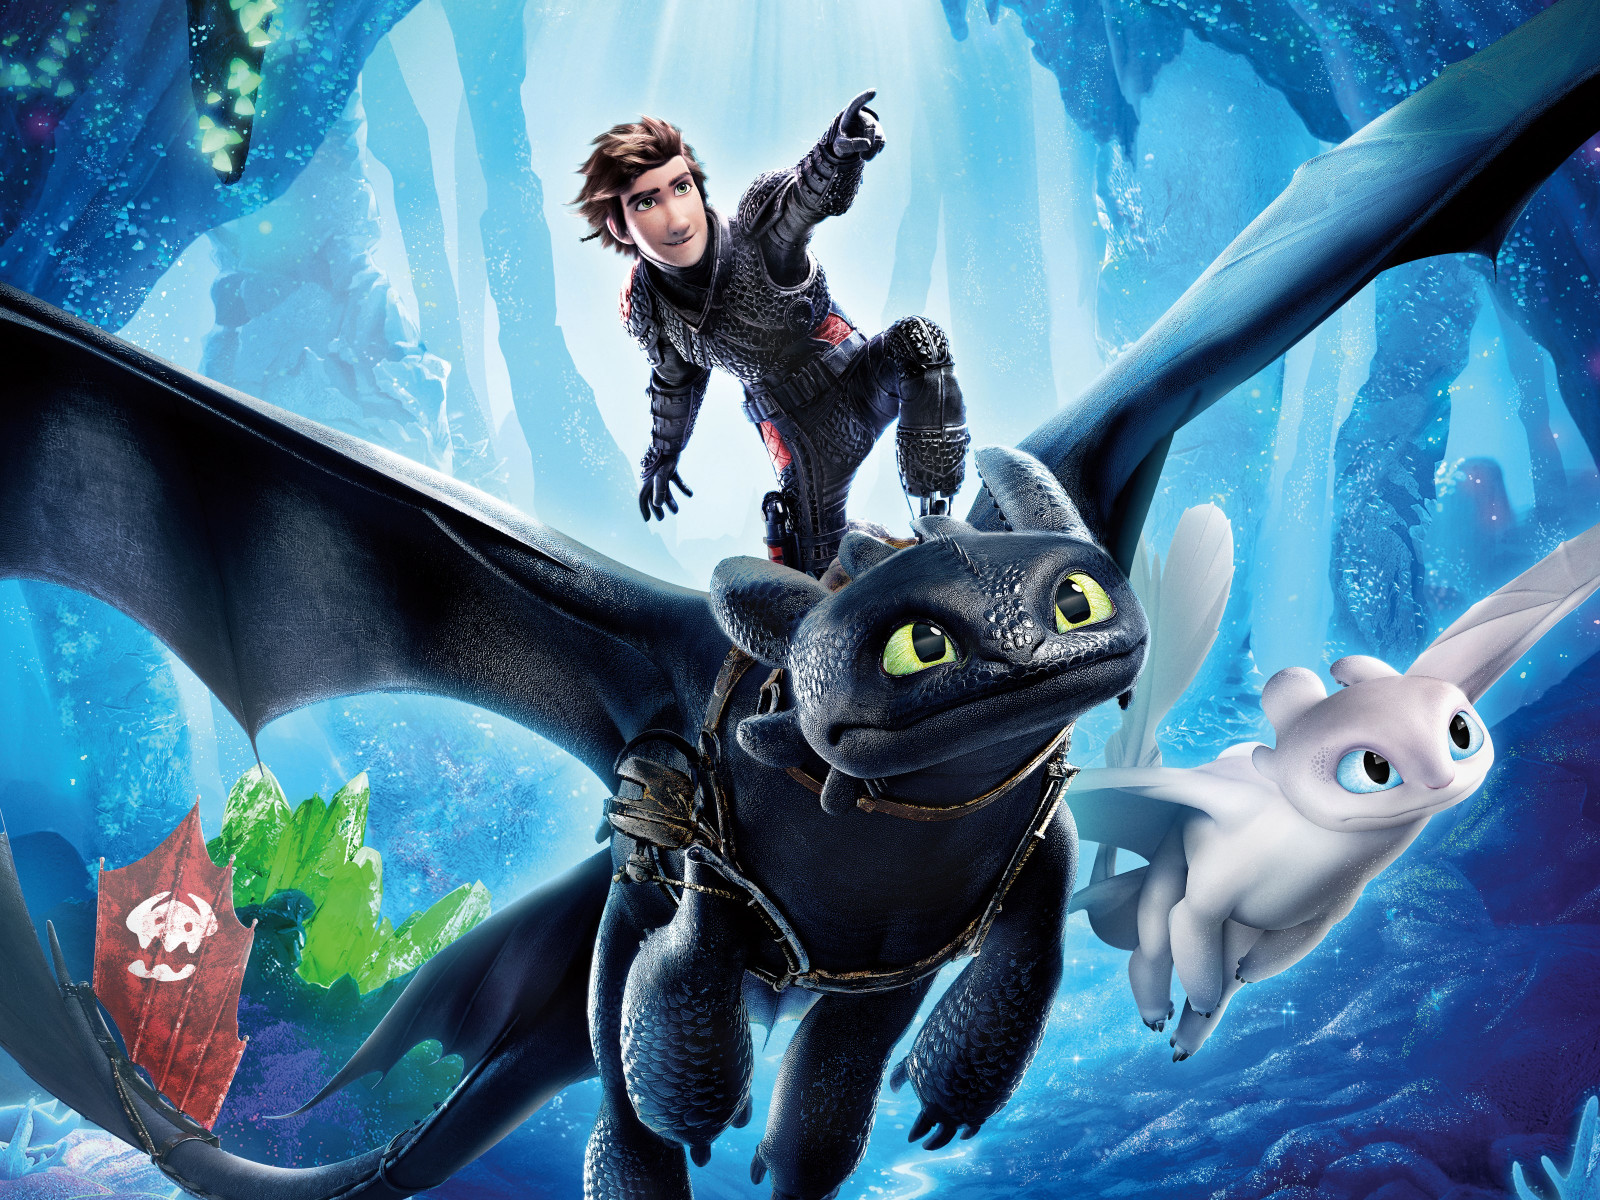 How to Train Your Dragon 2019 wallpaper 1600x1200